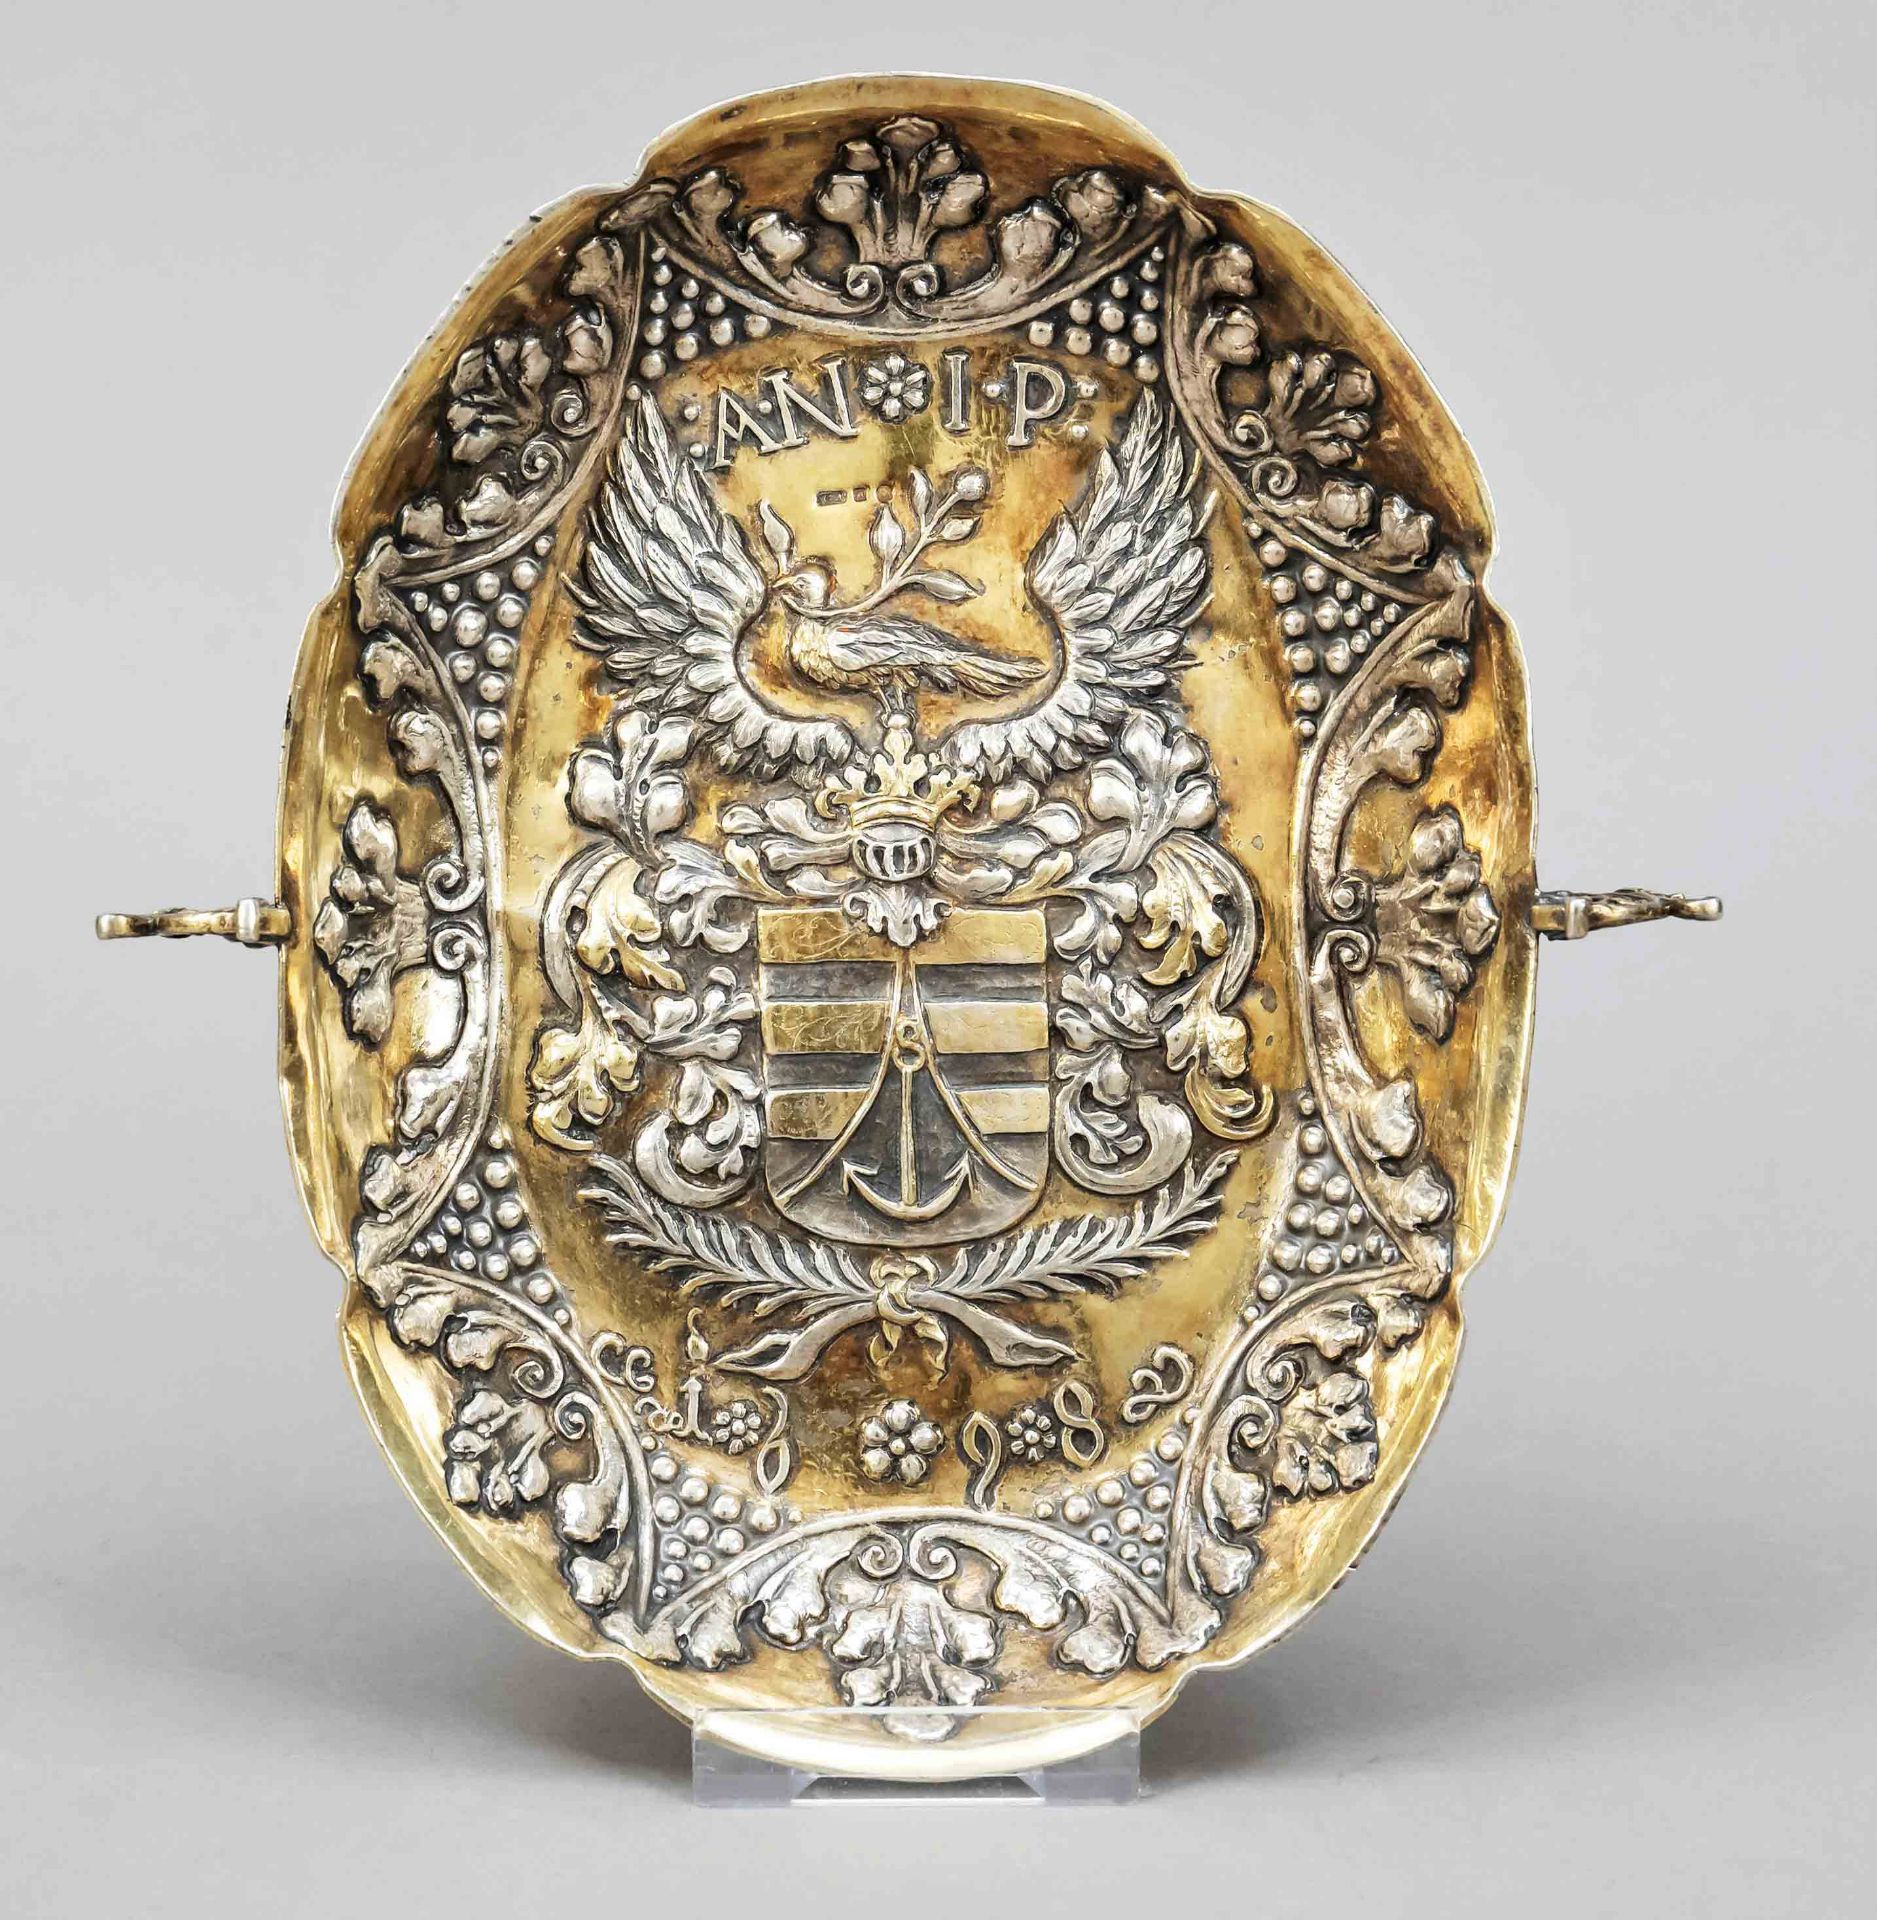 Oval bowl, late 17th century, silver hallmarked, partly gilded, of curved form, the sides with